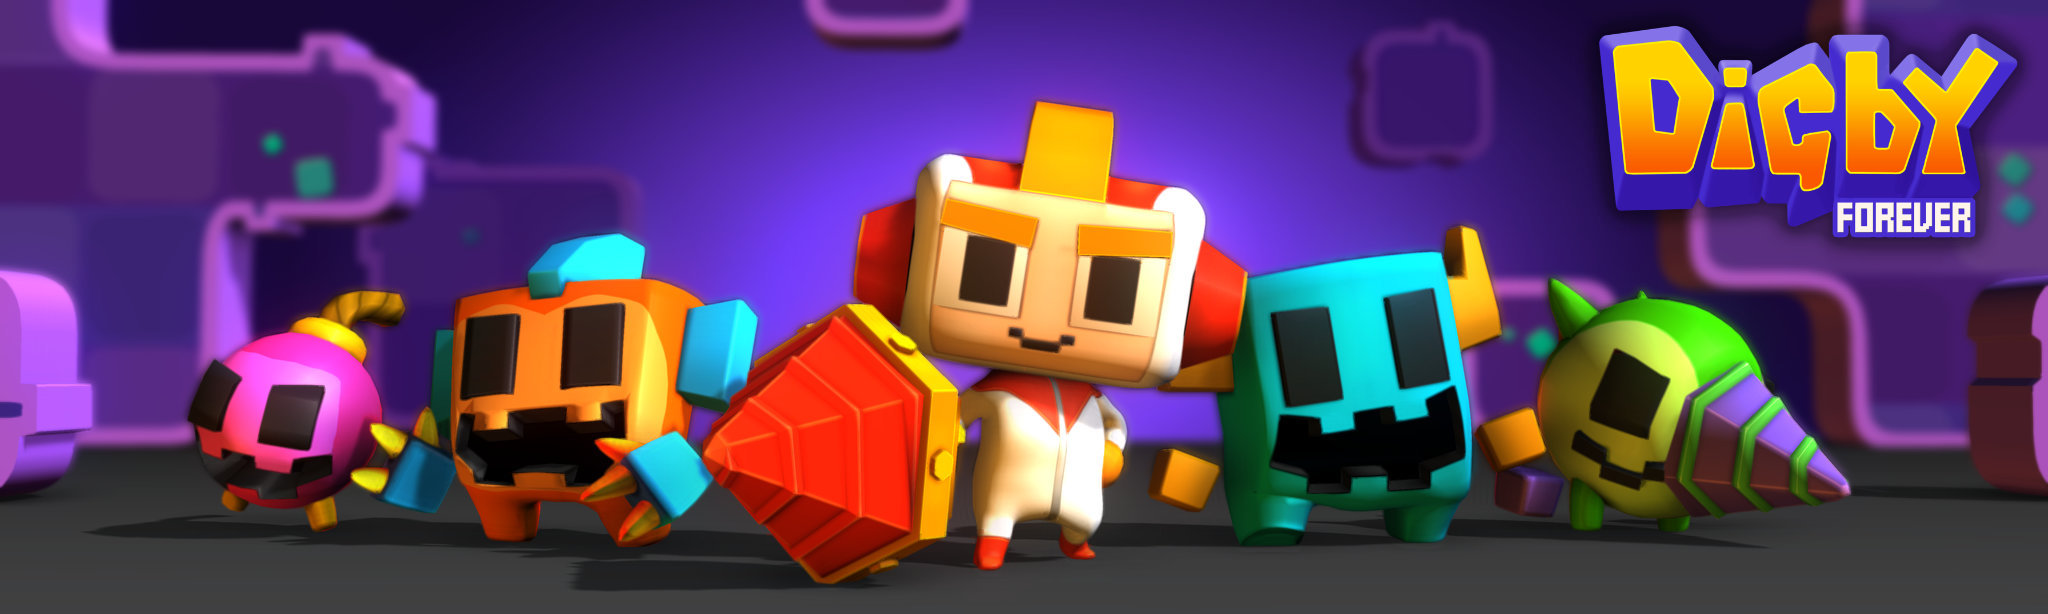 'Digby Forever' is a New Endless Digger from 'Pac-Man 256' and 'Cubemen' Developer 3 Sprockets